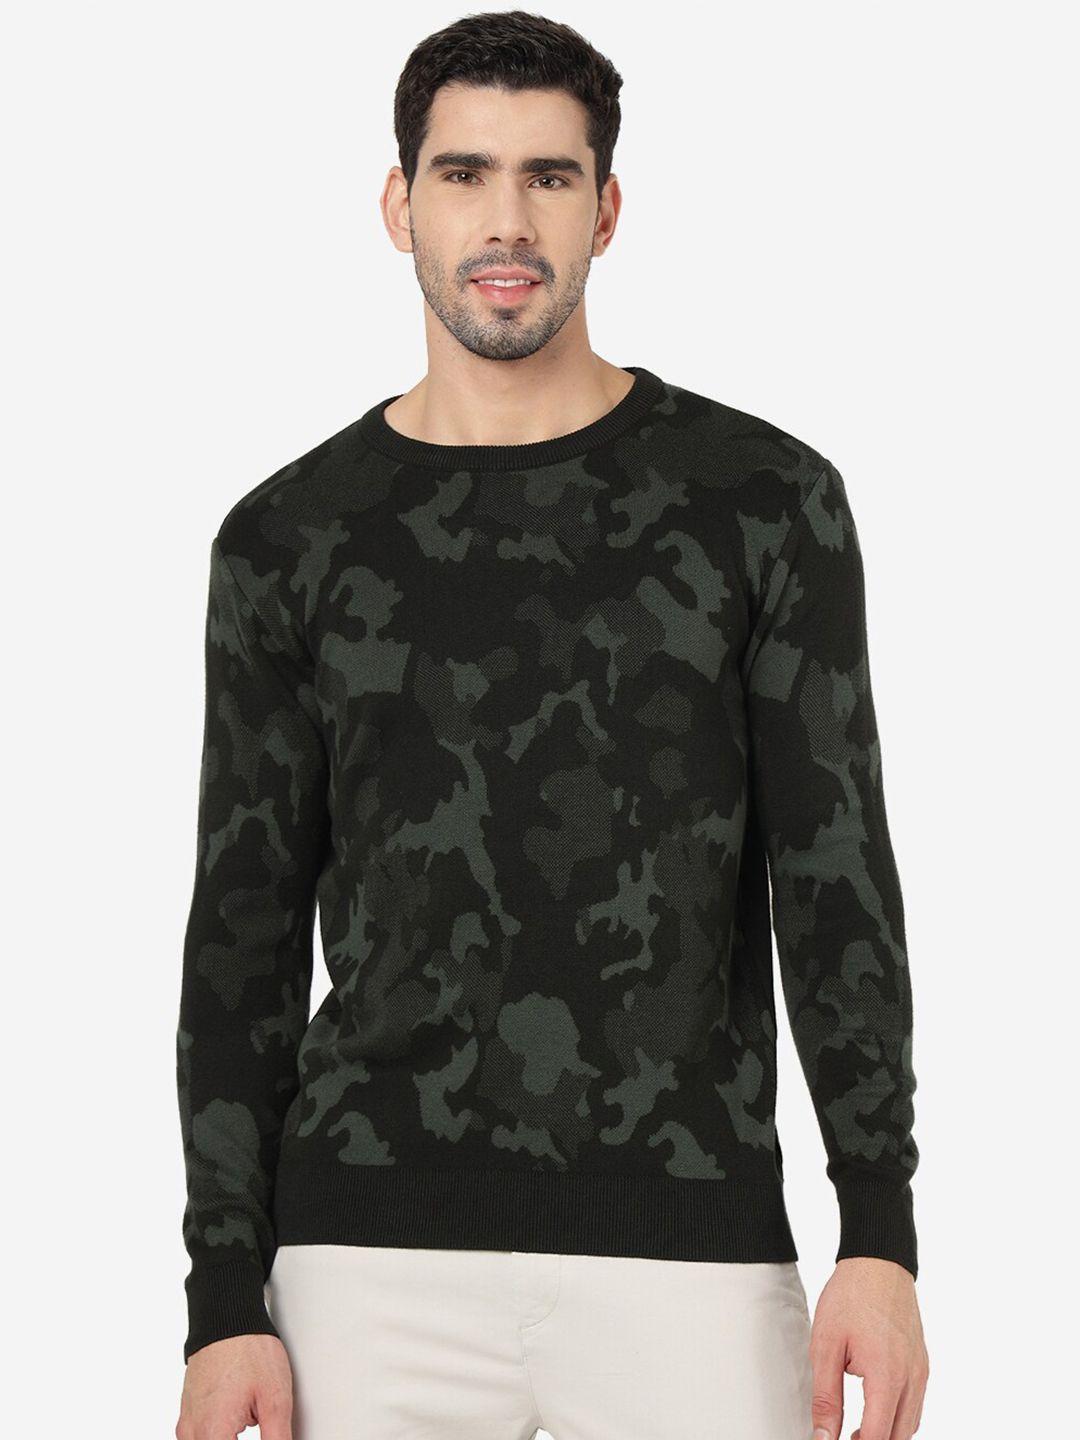 jade blue camouflage printed long sleeve cotton slim fit t-shirt